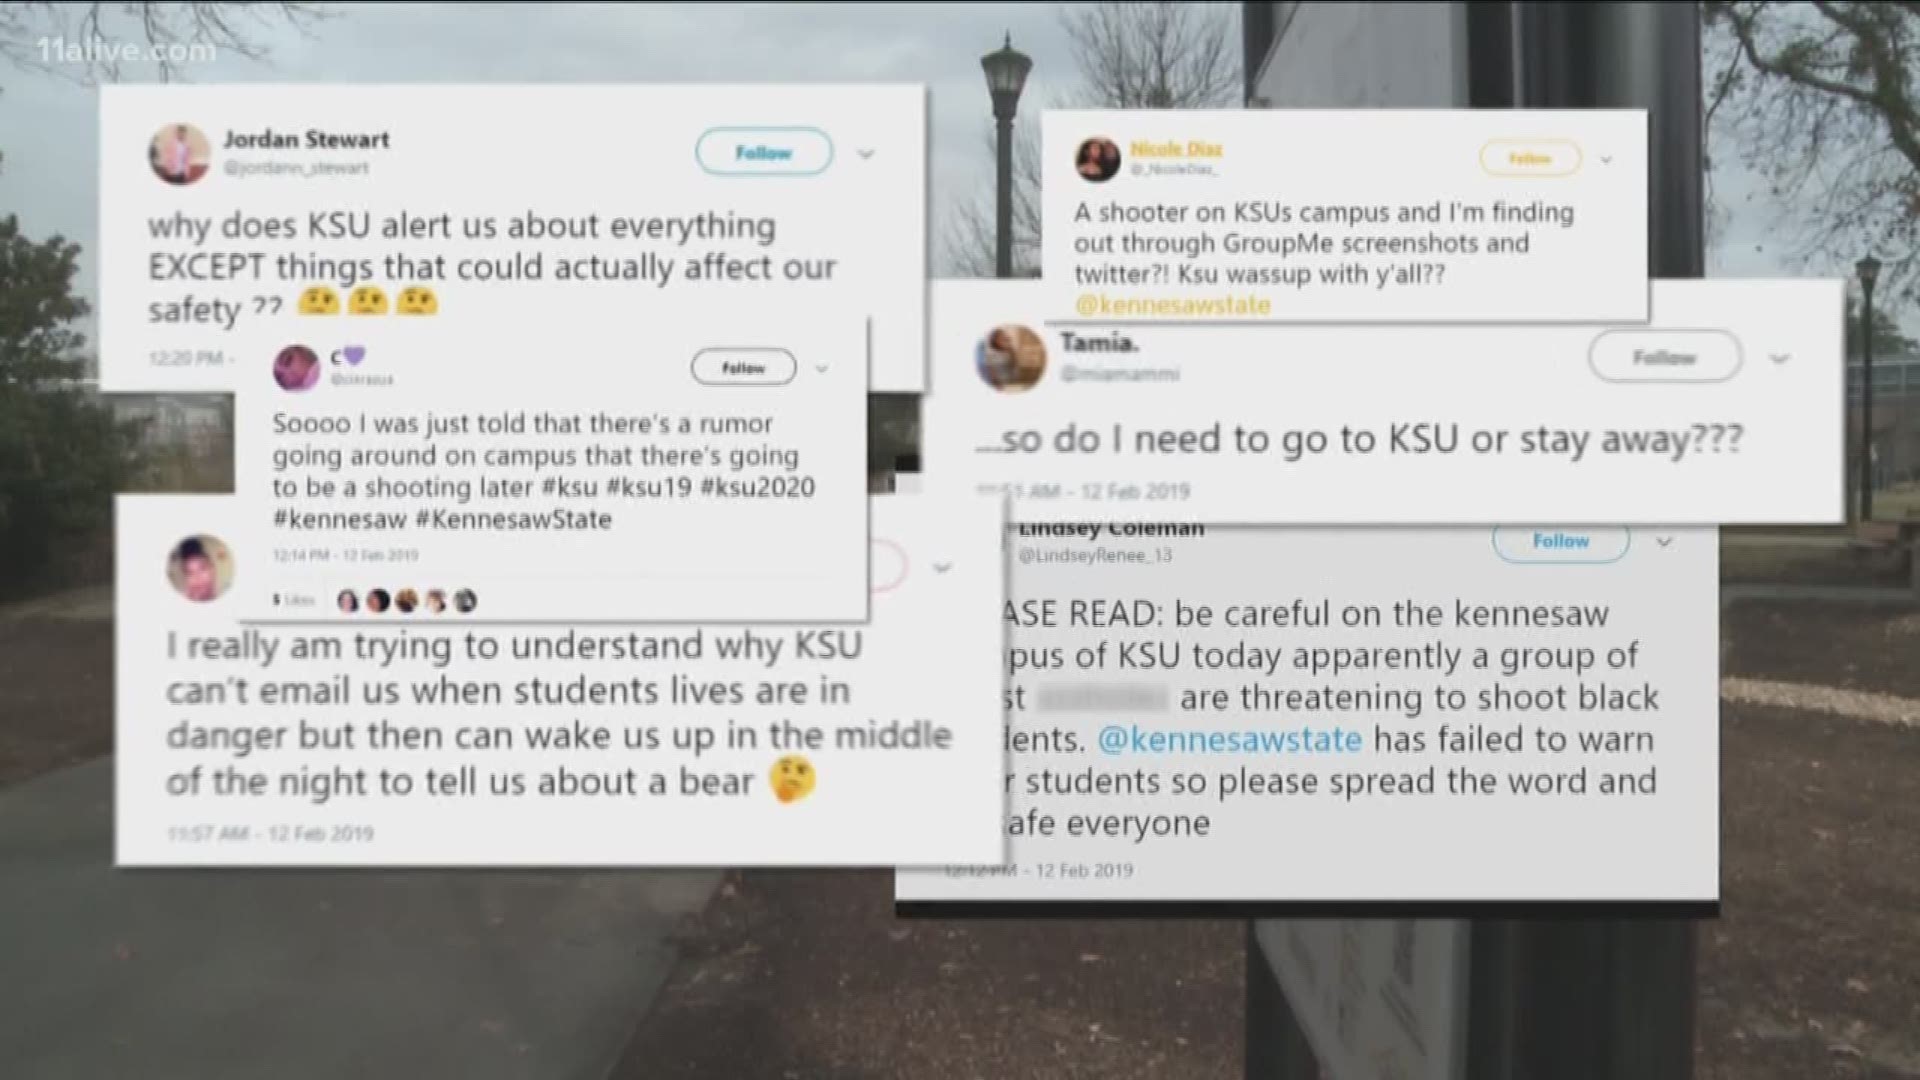 Some students at Kennesaw State said sometimes social media helps, but in some cases it hurts the situation when misinformation spreads.